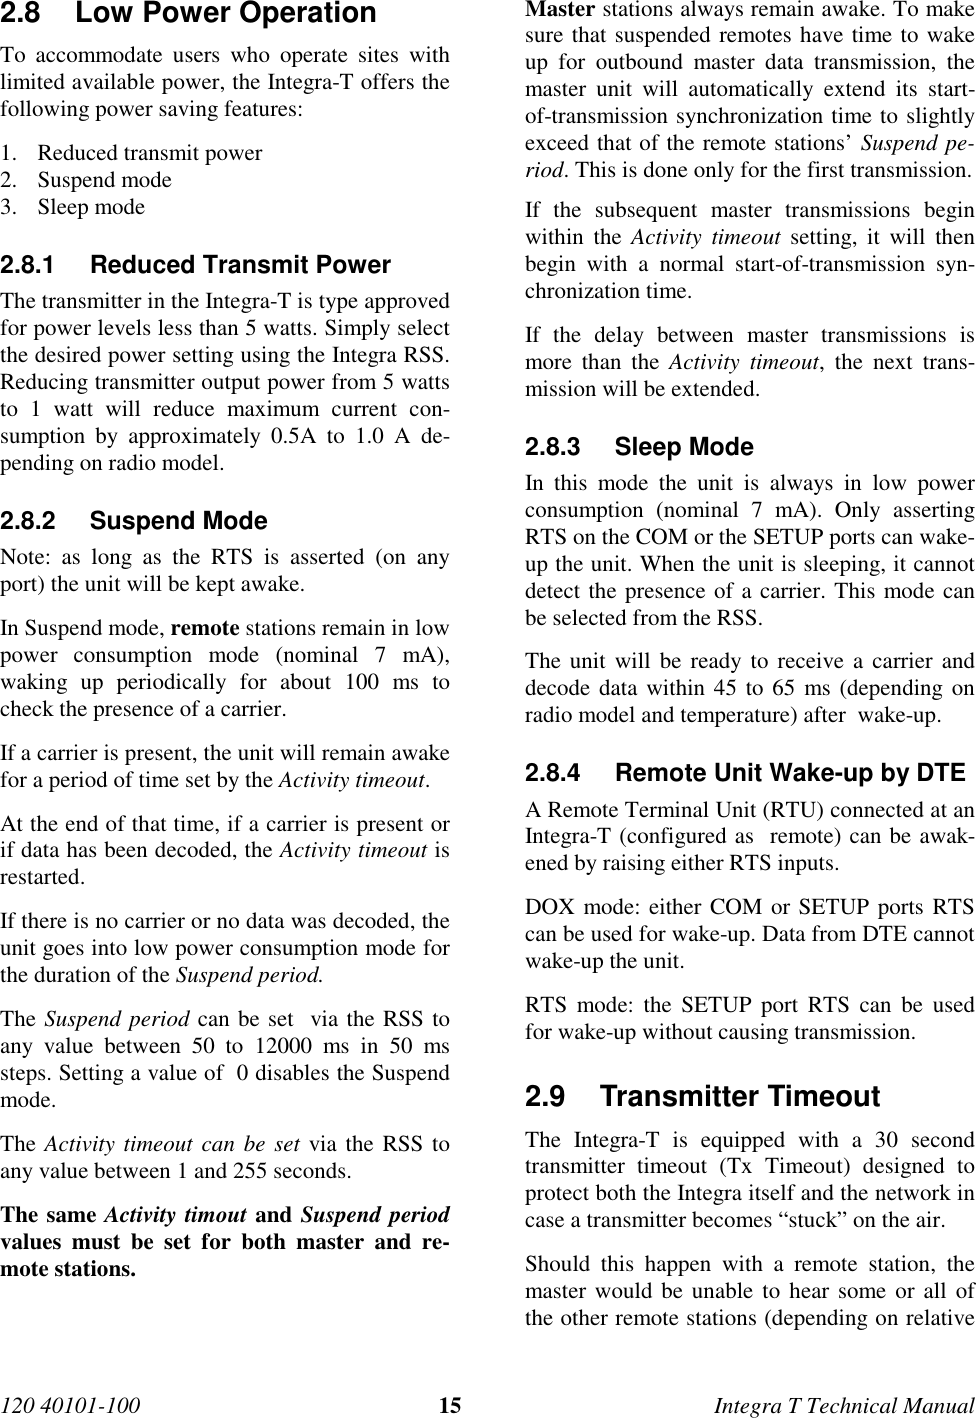 120 40101-100 15 Integra T Technical Manual2.8  Low Power Operation To accommodate users who operate sites withlimited available power, the Integra-T offers thefollowing power saving features:1. Reduced transmit power2. Suspend mode3. Sleep mode2.8.1  Reduced Transmit Power The transmitter in the Integra-T is type approvedfor power levels less than 5 watts. Simply selectthe desired power setting using the Integra RSS.Reducing transmitter output power from 5 wattsto 1 watt will reduce maximum current con-sumption by approximately 0.5A to 1.0 A de-pending on radio model.2.8.2 Suspend ModeNote: as long as the RTS is asserted (on anyport) the unit will be kept awake. In Suspend mode, remote stations remain in lowpower consumption mode (nominal 7 mA),waking up periodically for about 100 ms tocheck the presence of a carrier. If a carrier is present, the unit will remain awakefor a period of time set by the Activity timeout. At the end of that time, if a carrier is present orif data has been decoded, the Activity timeout isrestarted. If there is no carrier or no data was decoded, theunit goes into low power consumption mode forthe duration of the Suspend period. The Suspend period can be set  via the RSS toany value between 50 to 12000 ms in 50 mssteps. Setting a value of  0 disables the Suspendmode. The Activity timeout can be set via the RSS toany value between 1 and 255 seconds. The same Activity timout and Suspend periodvalues must be set for both master and re-mote stations.  Master stations always remain awake. To makesure that suspended remotes have time to wakeup for outbound master data transmission, themaster unit will automatically extend its start-of-transmission synchronization time to slightlyexceed that of the remote stations’ Suspend pe-riod. This is done only for the first transmission. If the subsequent master transmissions beginwithin the Activity timeout setting, it will thenbegin with a normal start-of-transmission syn-chronization time. If the delay between master transmissions ismore than the Activity timeout, the next trans-mission will be extended.2.8.3 Sleep ModeIn this mode the unit is always in low powerconsumption (nominal 7 mA). Only assertingRTS on the COM or the SETUP ports can wake-up the unit. When the unit is sleeping, it cannotdetect the presence of a carrier. This mode canbe selected from the RSS.The unit will be ready to receive a carrier anddecode data within 45 to 65 ms (depending onradio model and temperature) after  wake-up.2.8.4  Remote Unit Wake-up by DTEA Remote Terminal Unit (RTU) connected at anIntegra-T (configured as  remote) can be awak-ened by raising either RTS inputs.DOX mode: either COM or SETUP ports RTScan be used for wake-up. Data from DTE cannotwake-up the unit.RTS mode: the SETUP port RTS can be usedfor wake-up without causing transmission.2.9 Transmitter Timeout The Integra-T is equipped with a 30 secondtransmitter timeout (Tx Timeout) designed toprotect both the Integra itself and the network incase a transmitter becomes “stuck” on the air. Should this happen with a remote station, themaster would be unable to hear some or all ofthe other remote stations (depending on relative